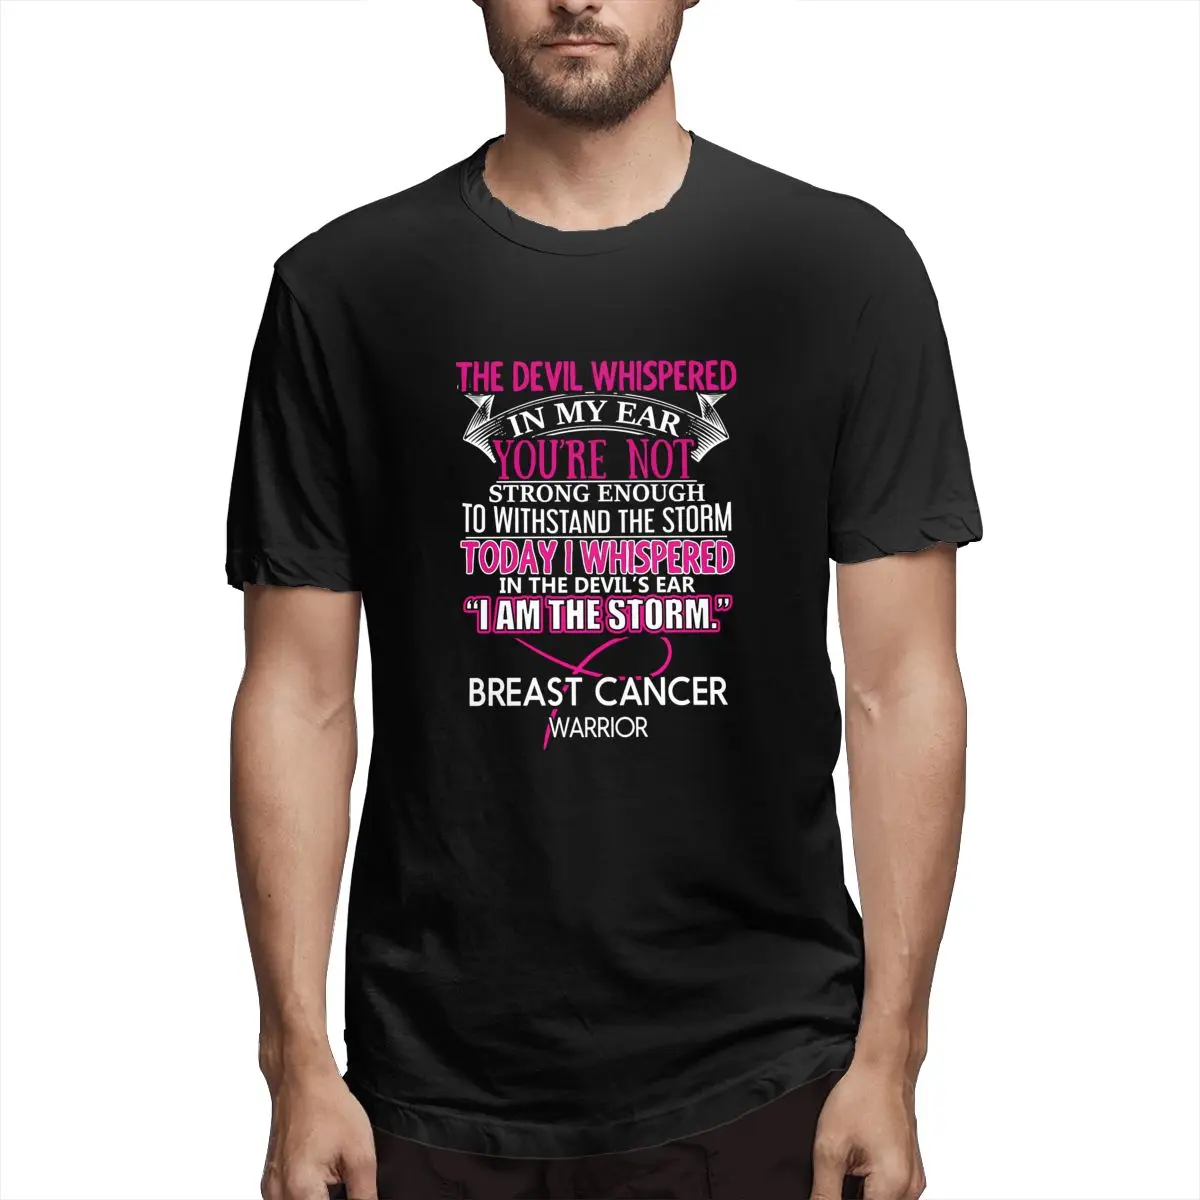 

I AM THE STORM - Breast Cancer WARRIOR Graphic Tee Men's Short Sleeve T-shirt Funny Cotton Tops